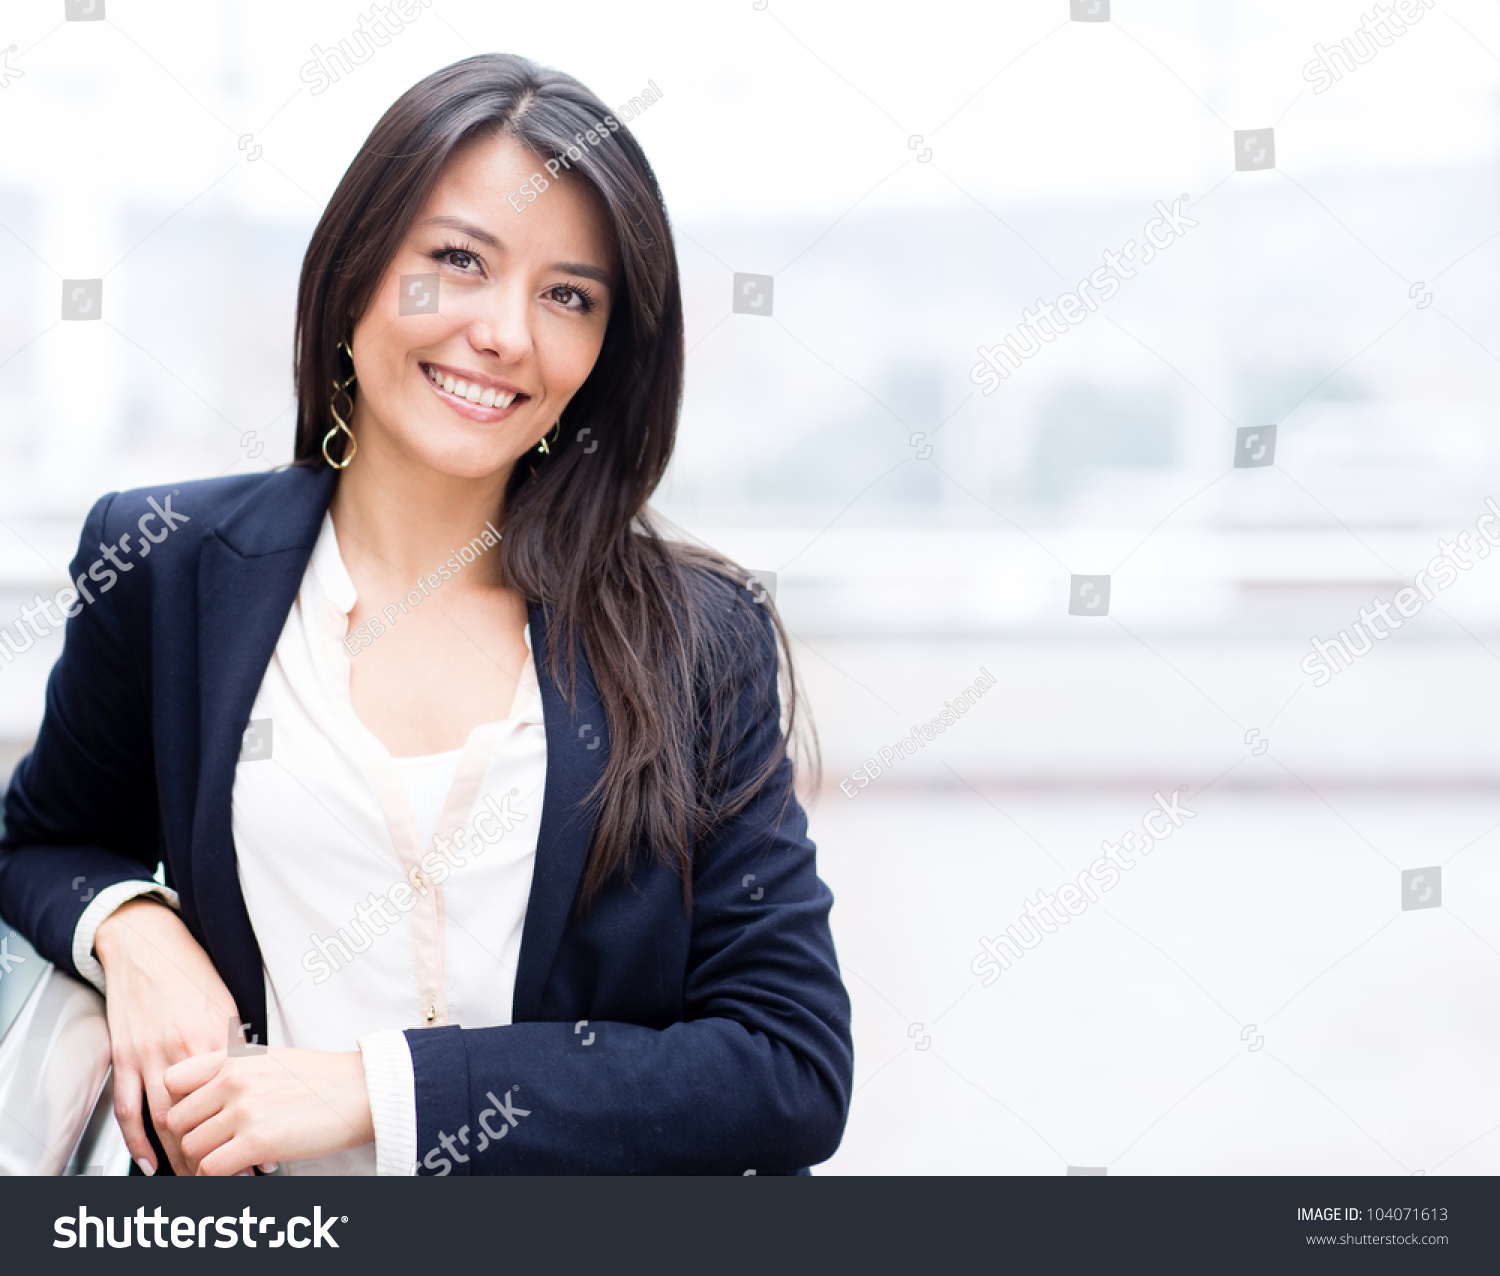 stock-photo-successful-business-woman-looking-confident-and-smiling-104071613.jpg